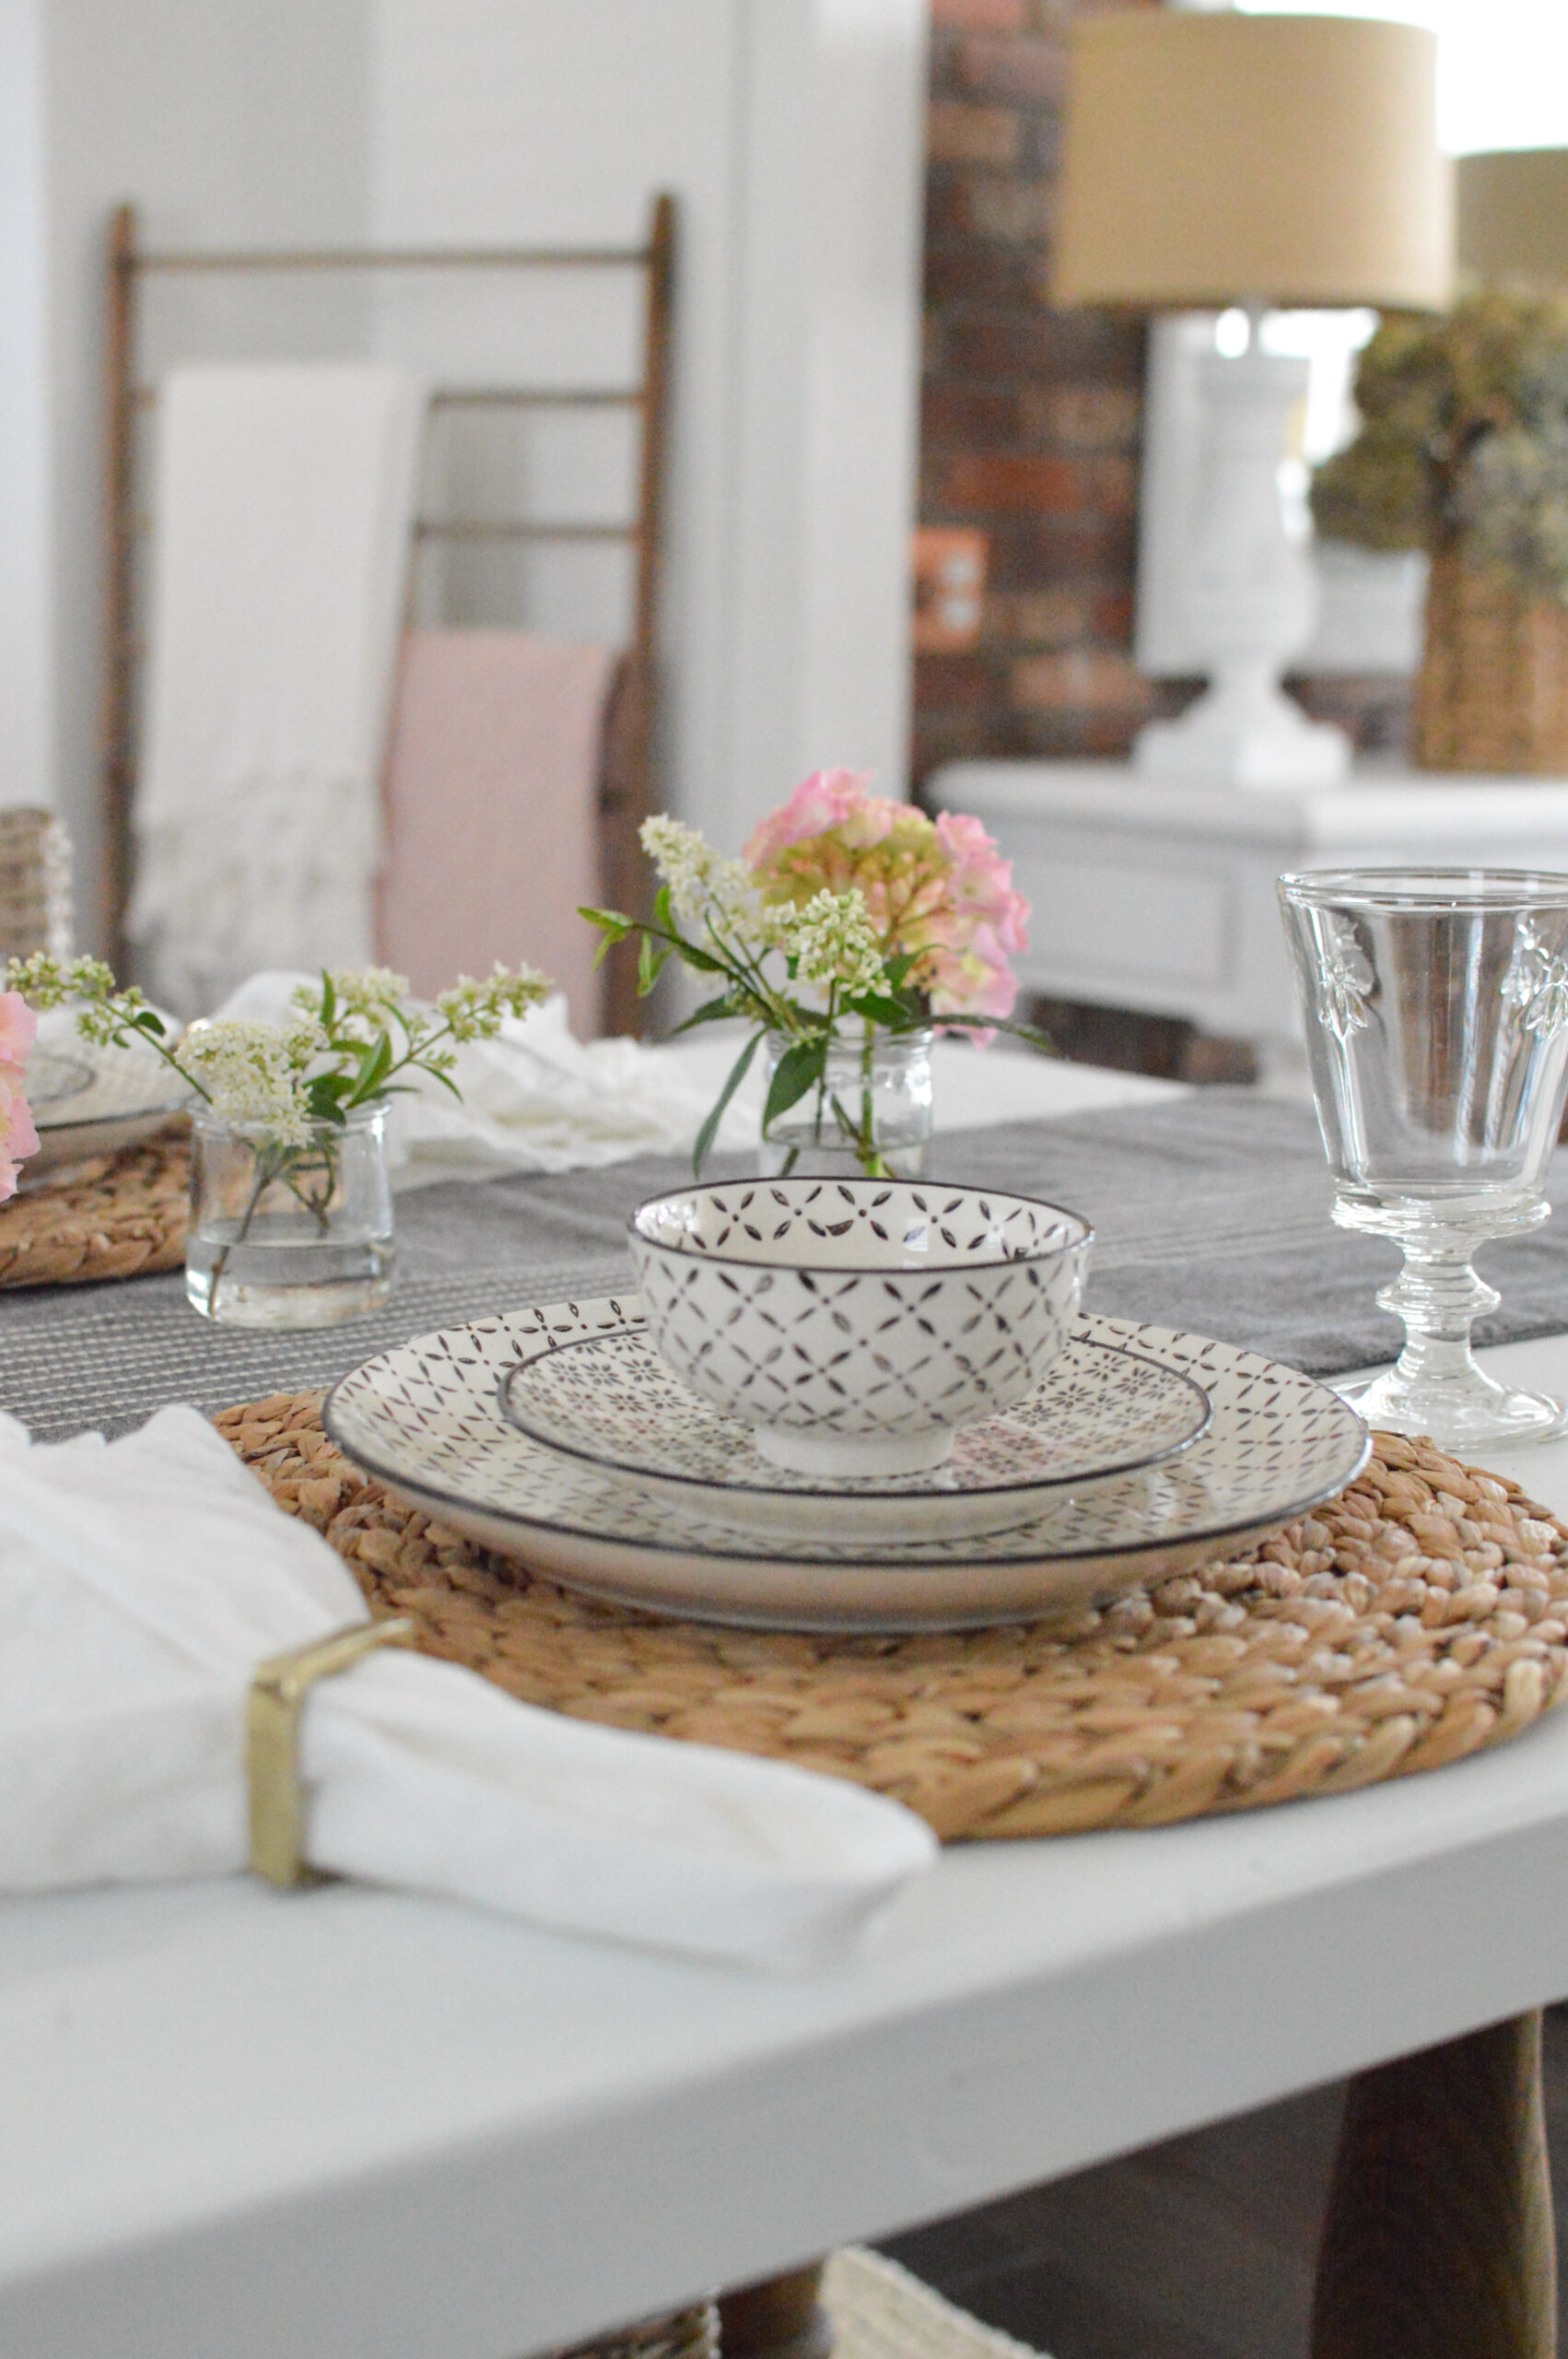 https://foxhollowcottage.com/wp-content/uploads/2021/06/Casual-table-setting-Norden-dishes-black-white-hydrangeas-honeysuckle-affordable-easy-decorating-ideas-at-Fox-Hollow-Cottage_-10-scaled.jpg